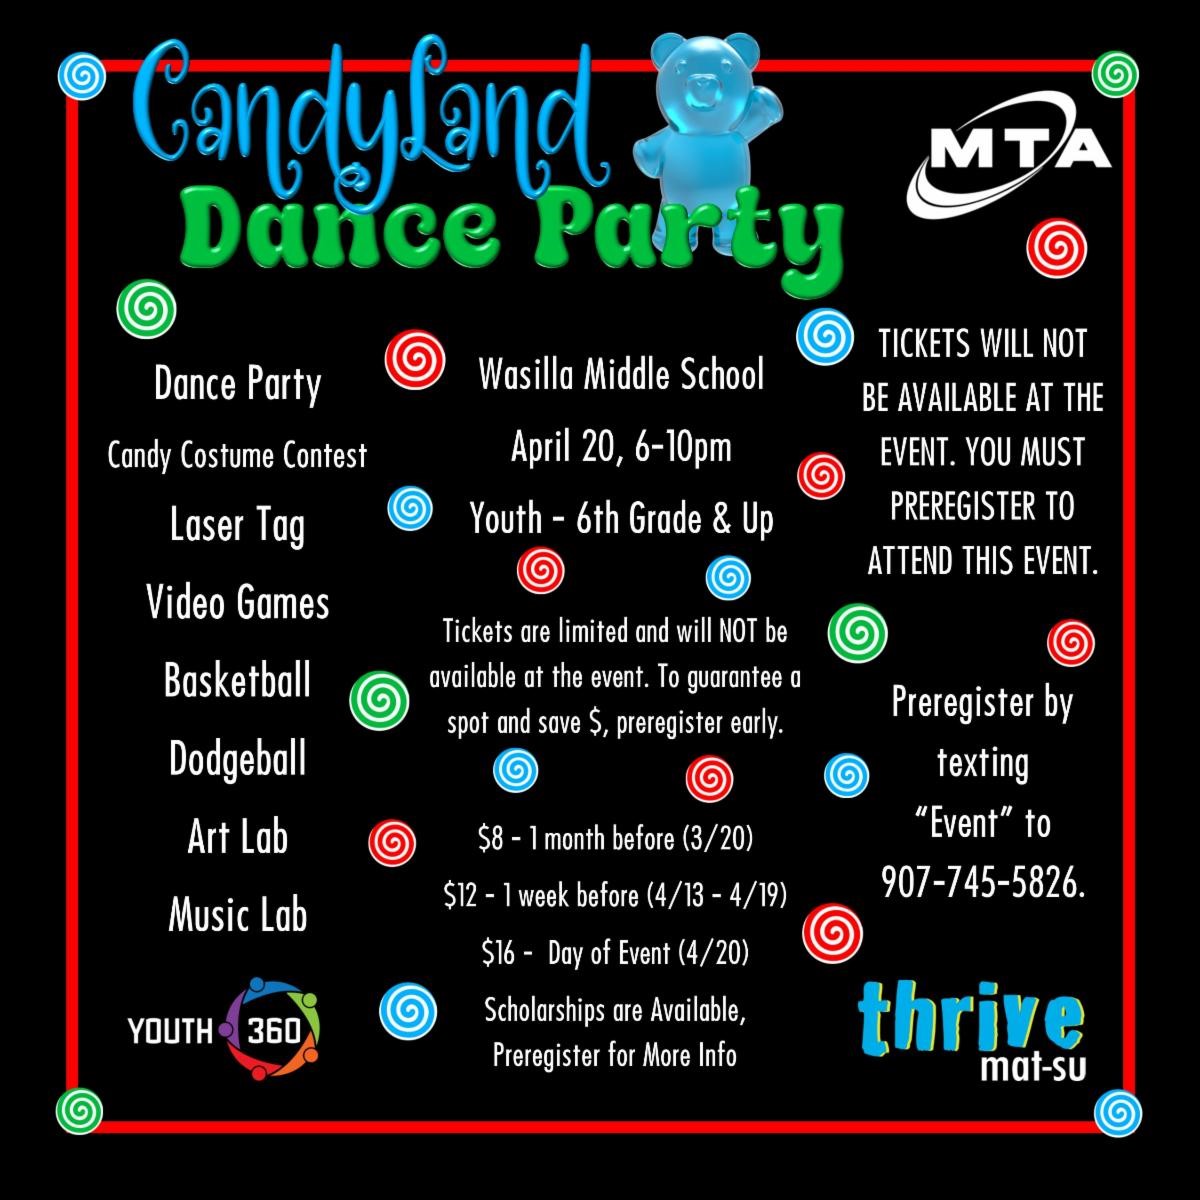 CandyLand Dance Party